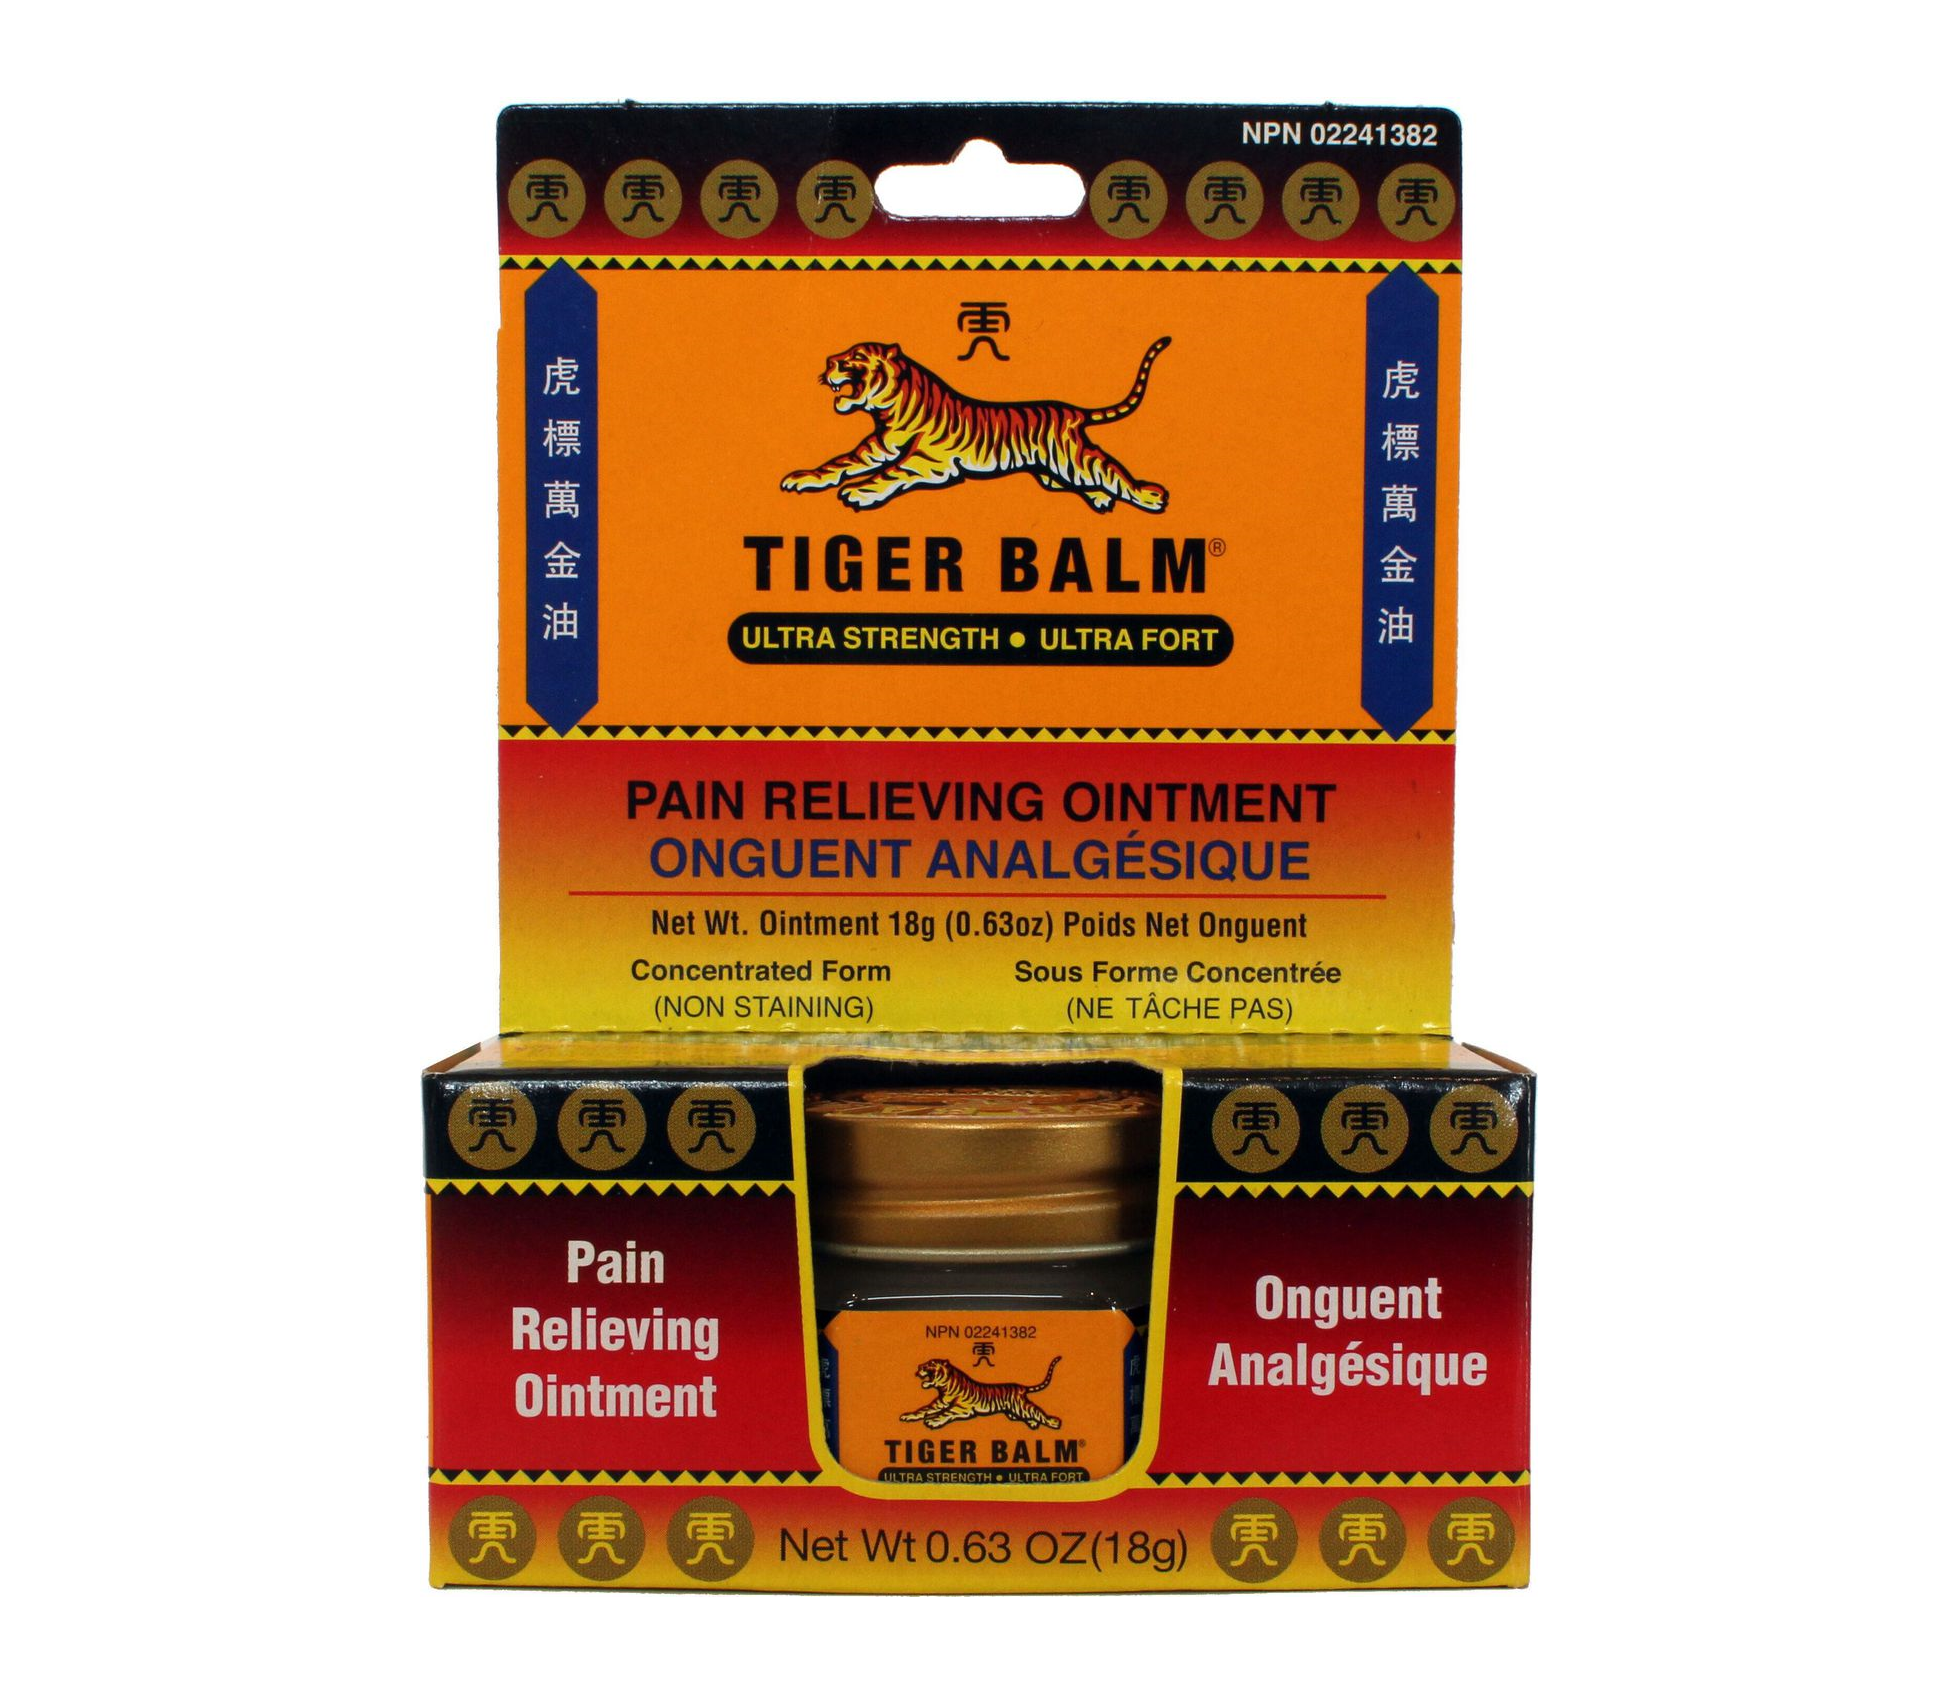 Tiger Balm Ultra Strength Pain Relieving Ointment 18g